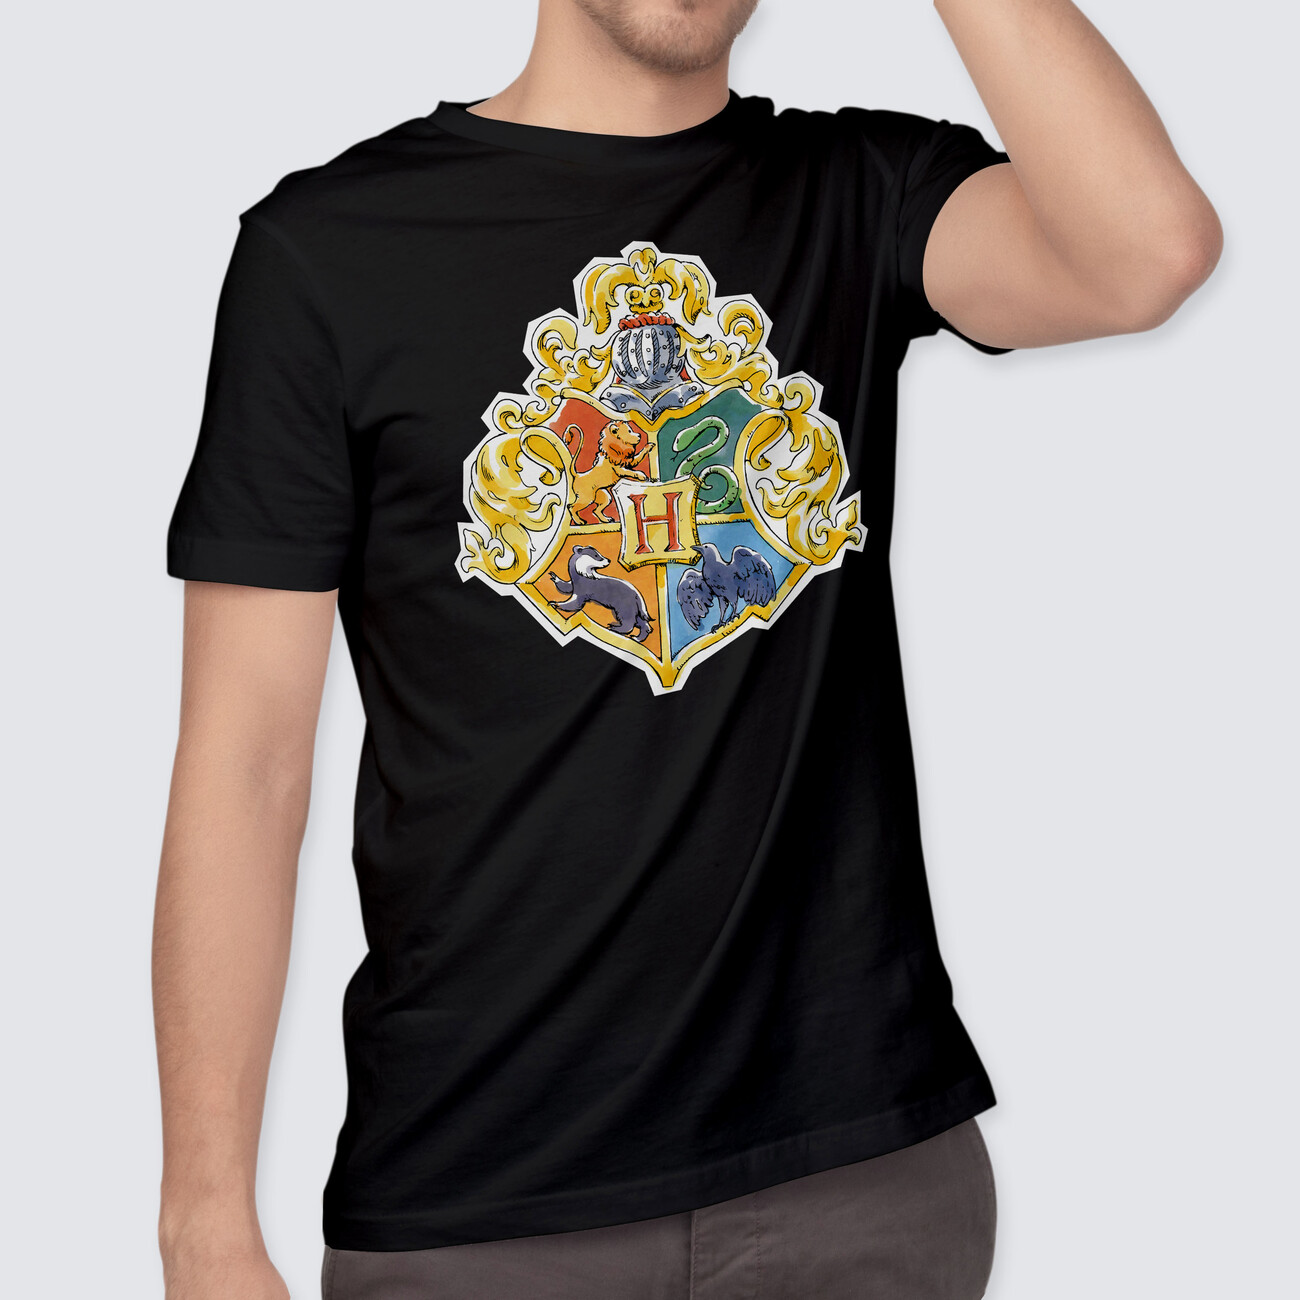 fans Crest accessories for | - Potter merchandise Hogwarts and Harry Clothes